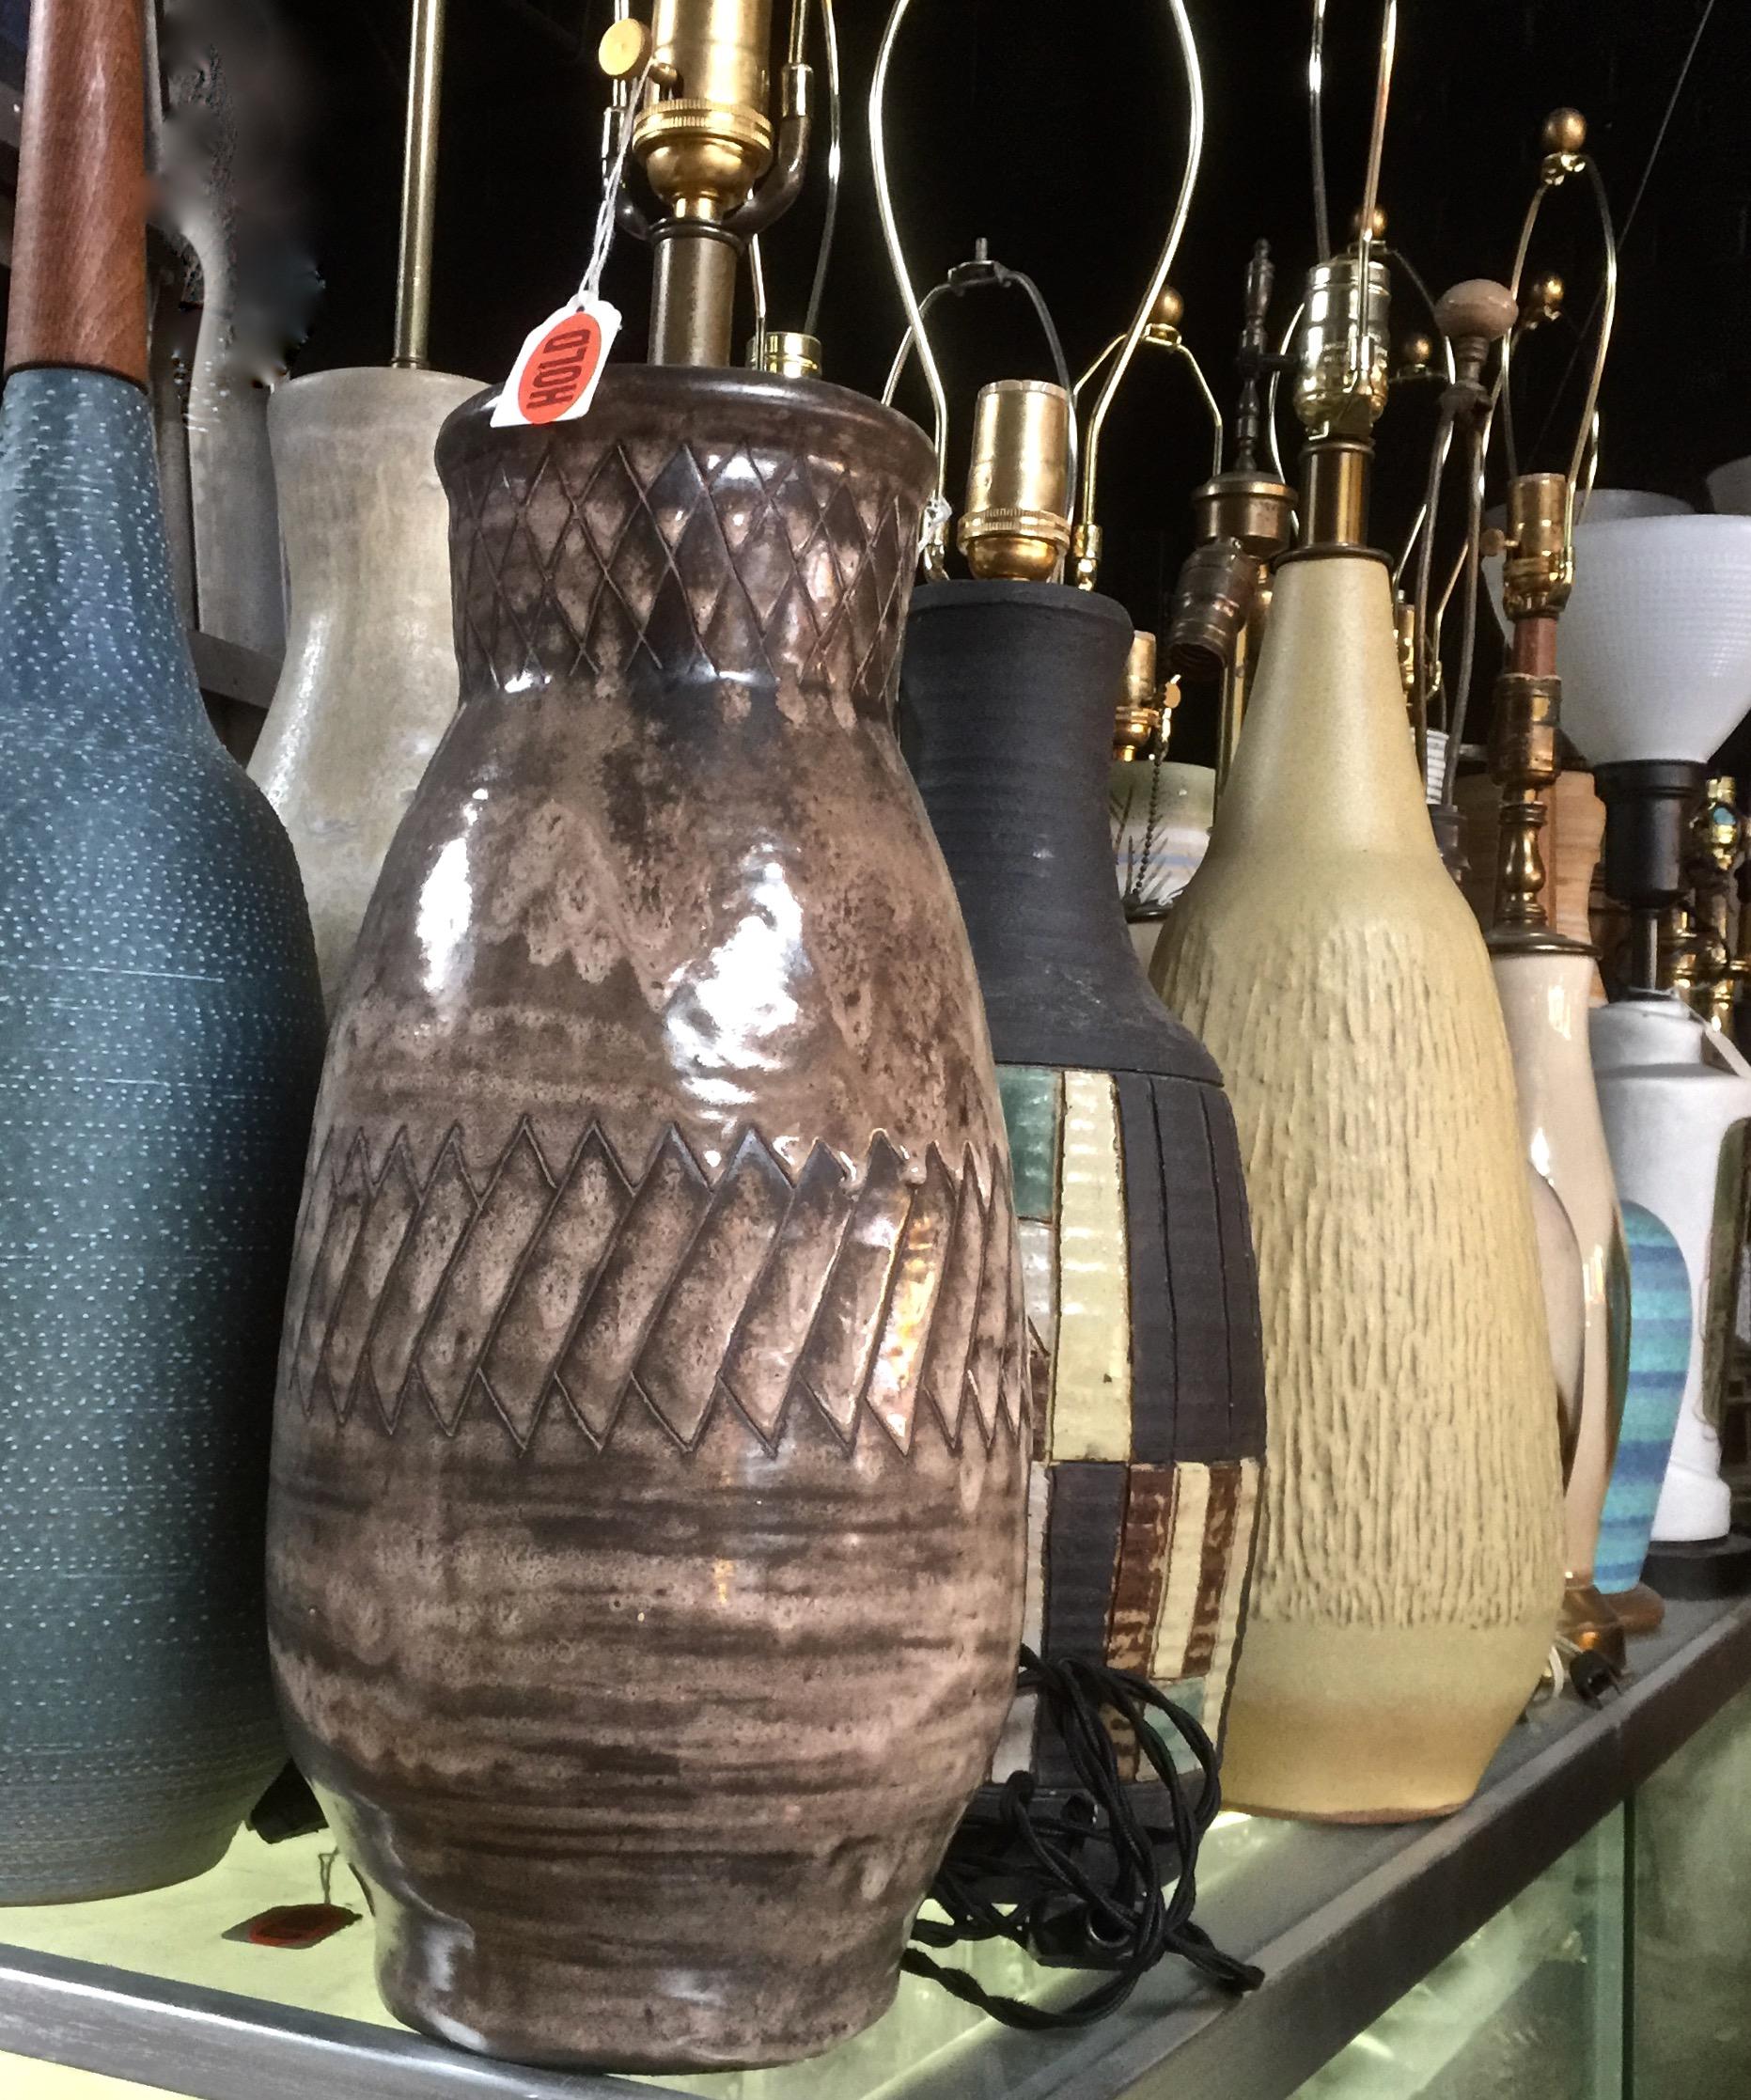 Marianna von Allesch handcrafted Earthen Glazed Ceramic Table Lamp. Featuring a hand thrown, natural bottle form, hand washed, reflective, hand incised diamond geometric pattern, with mottled Taupe, Sand, Coffee coloration and Brass stem. Glossy.